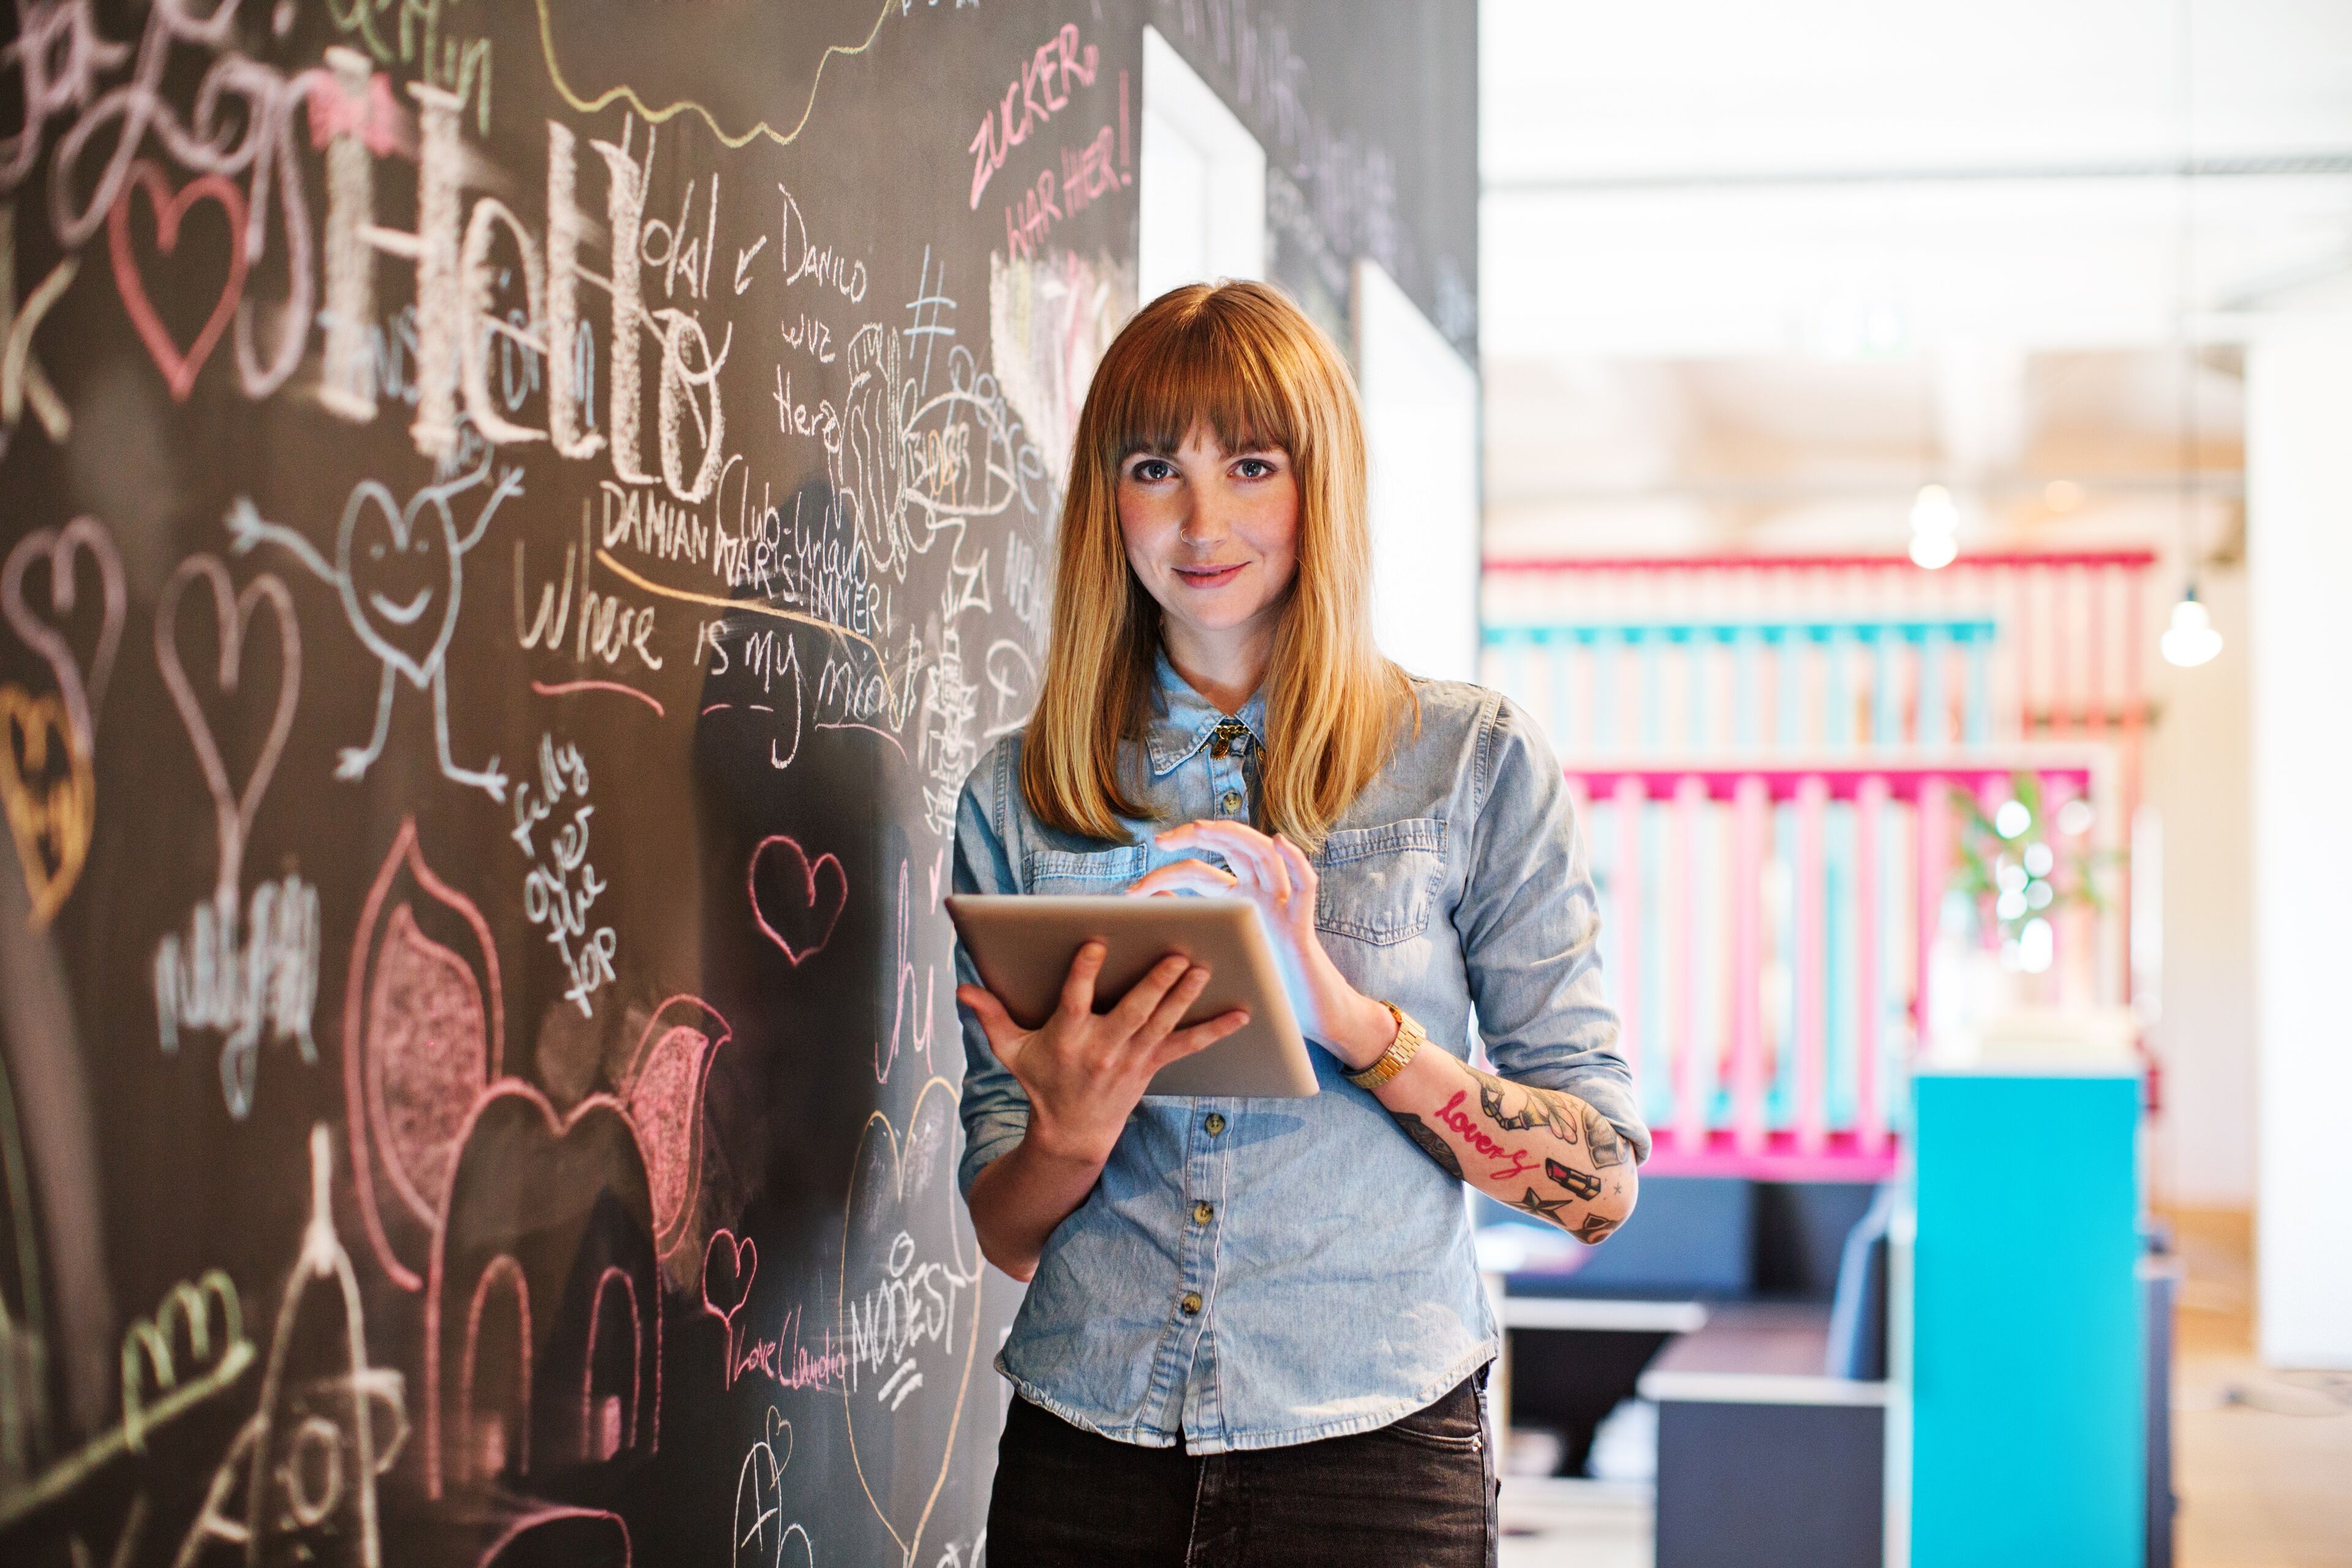 A woman in a denim shirt stands holding a tablet in front of a chalkboard wall filled with doodles and messages.